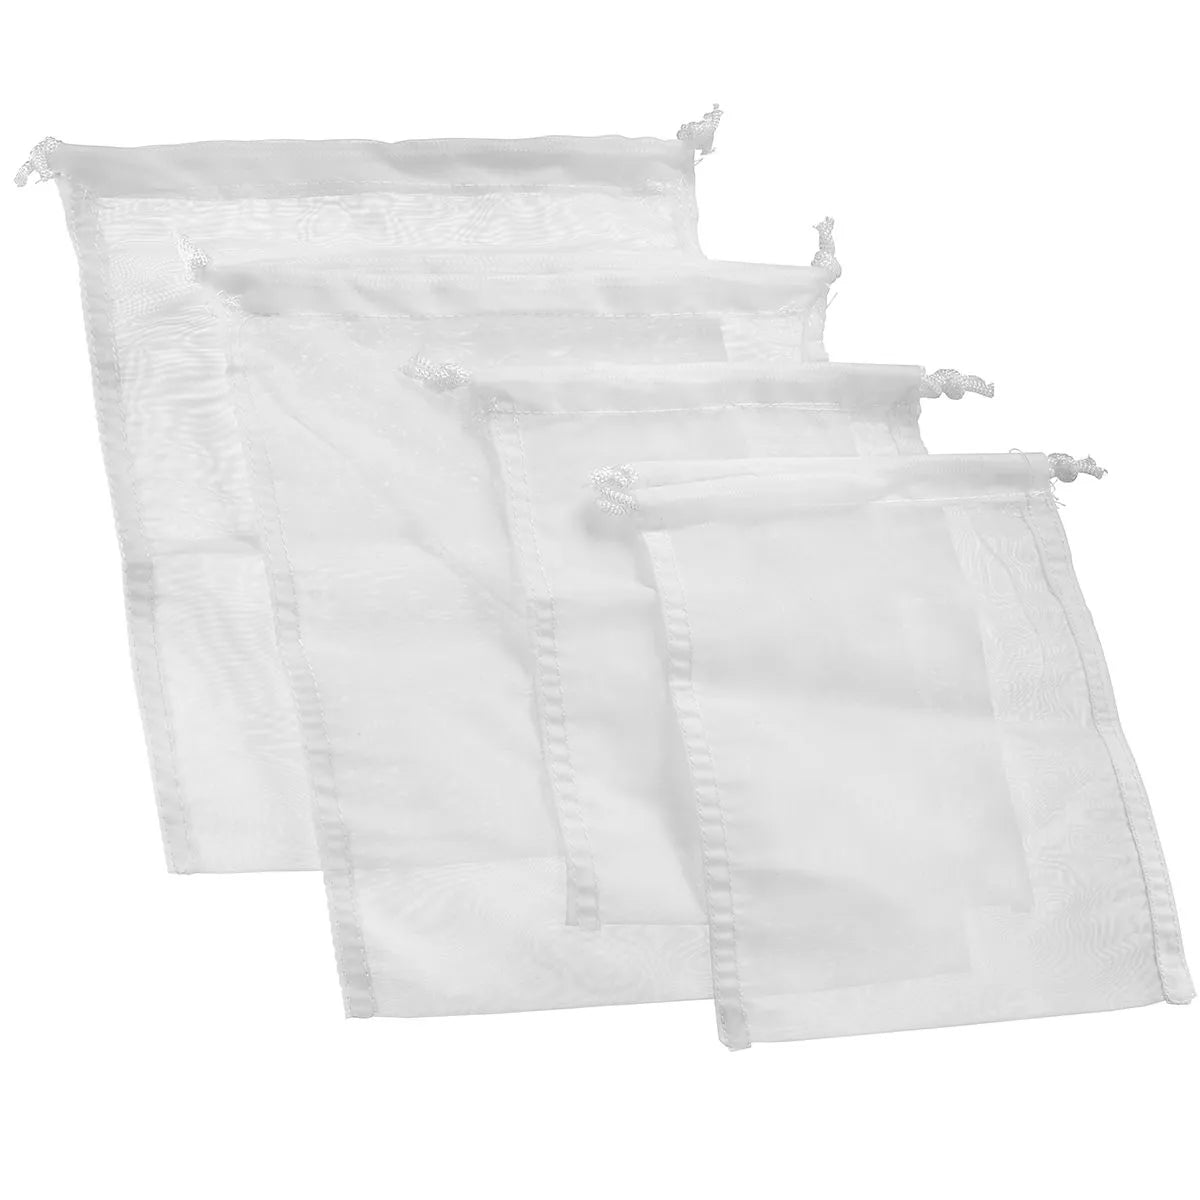 Maxspect Mesh Media Bag with Draw String (Set of 4)